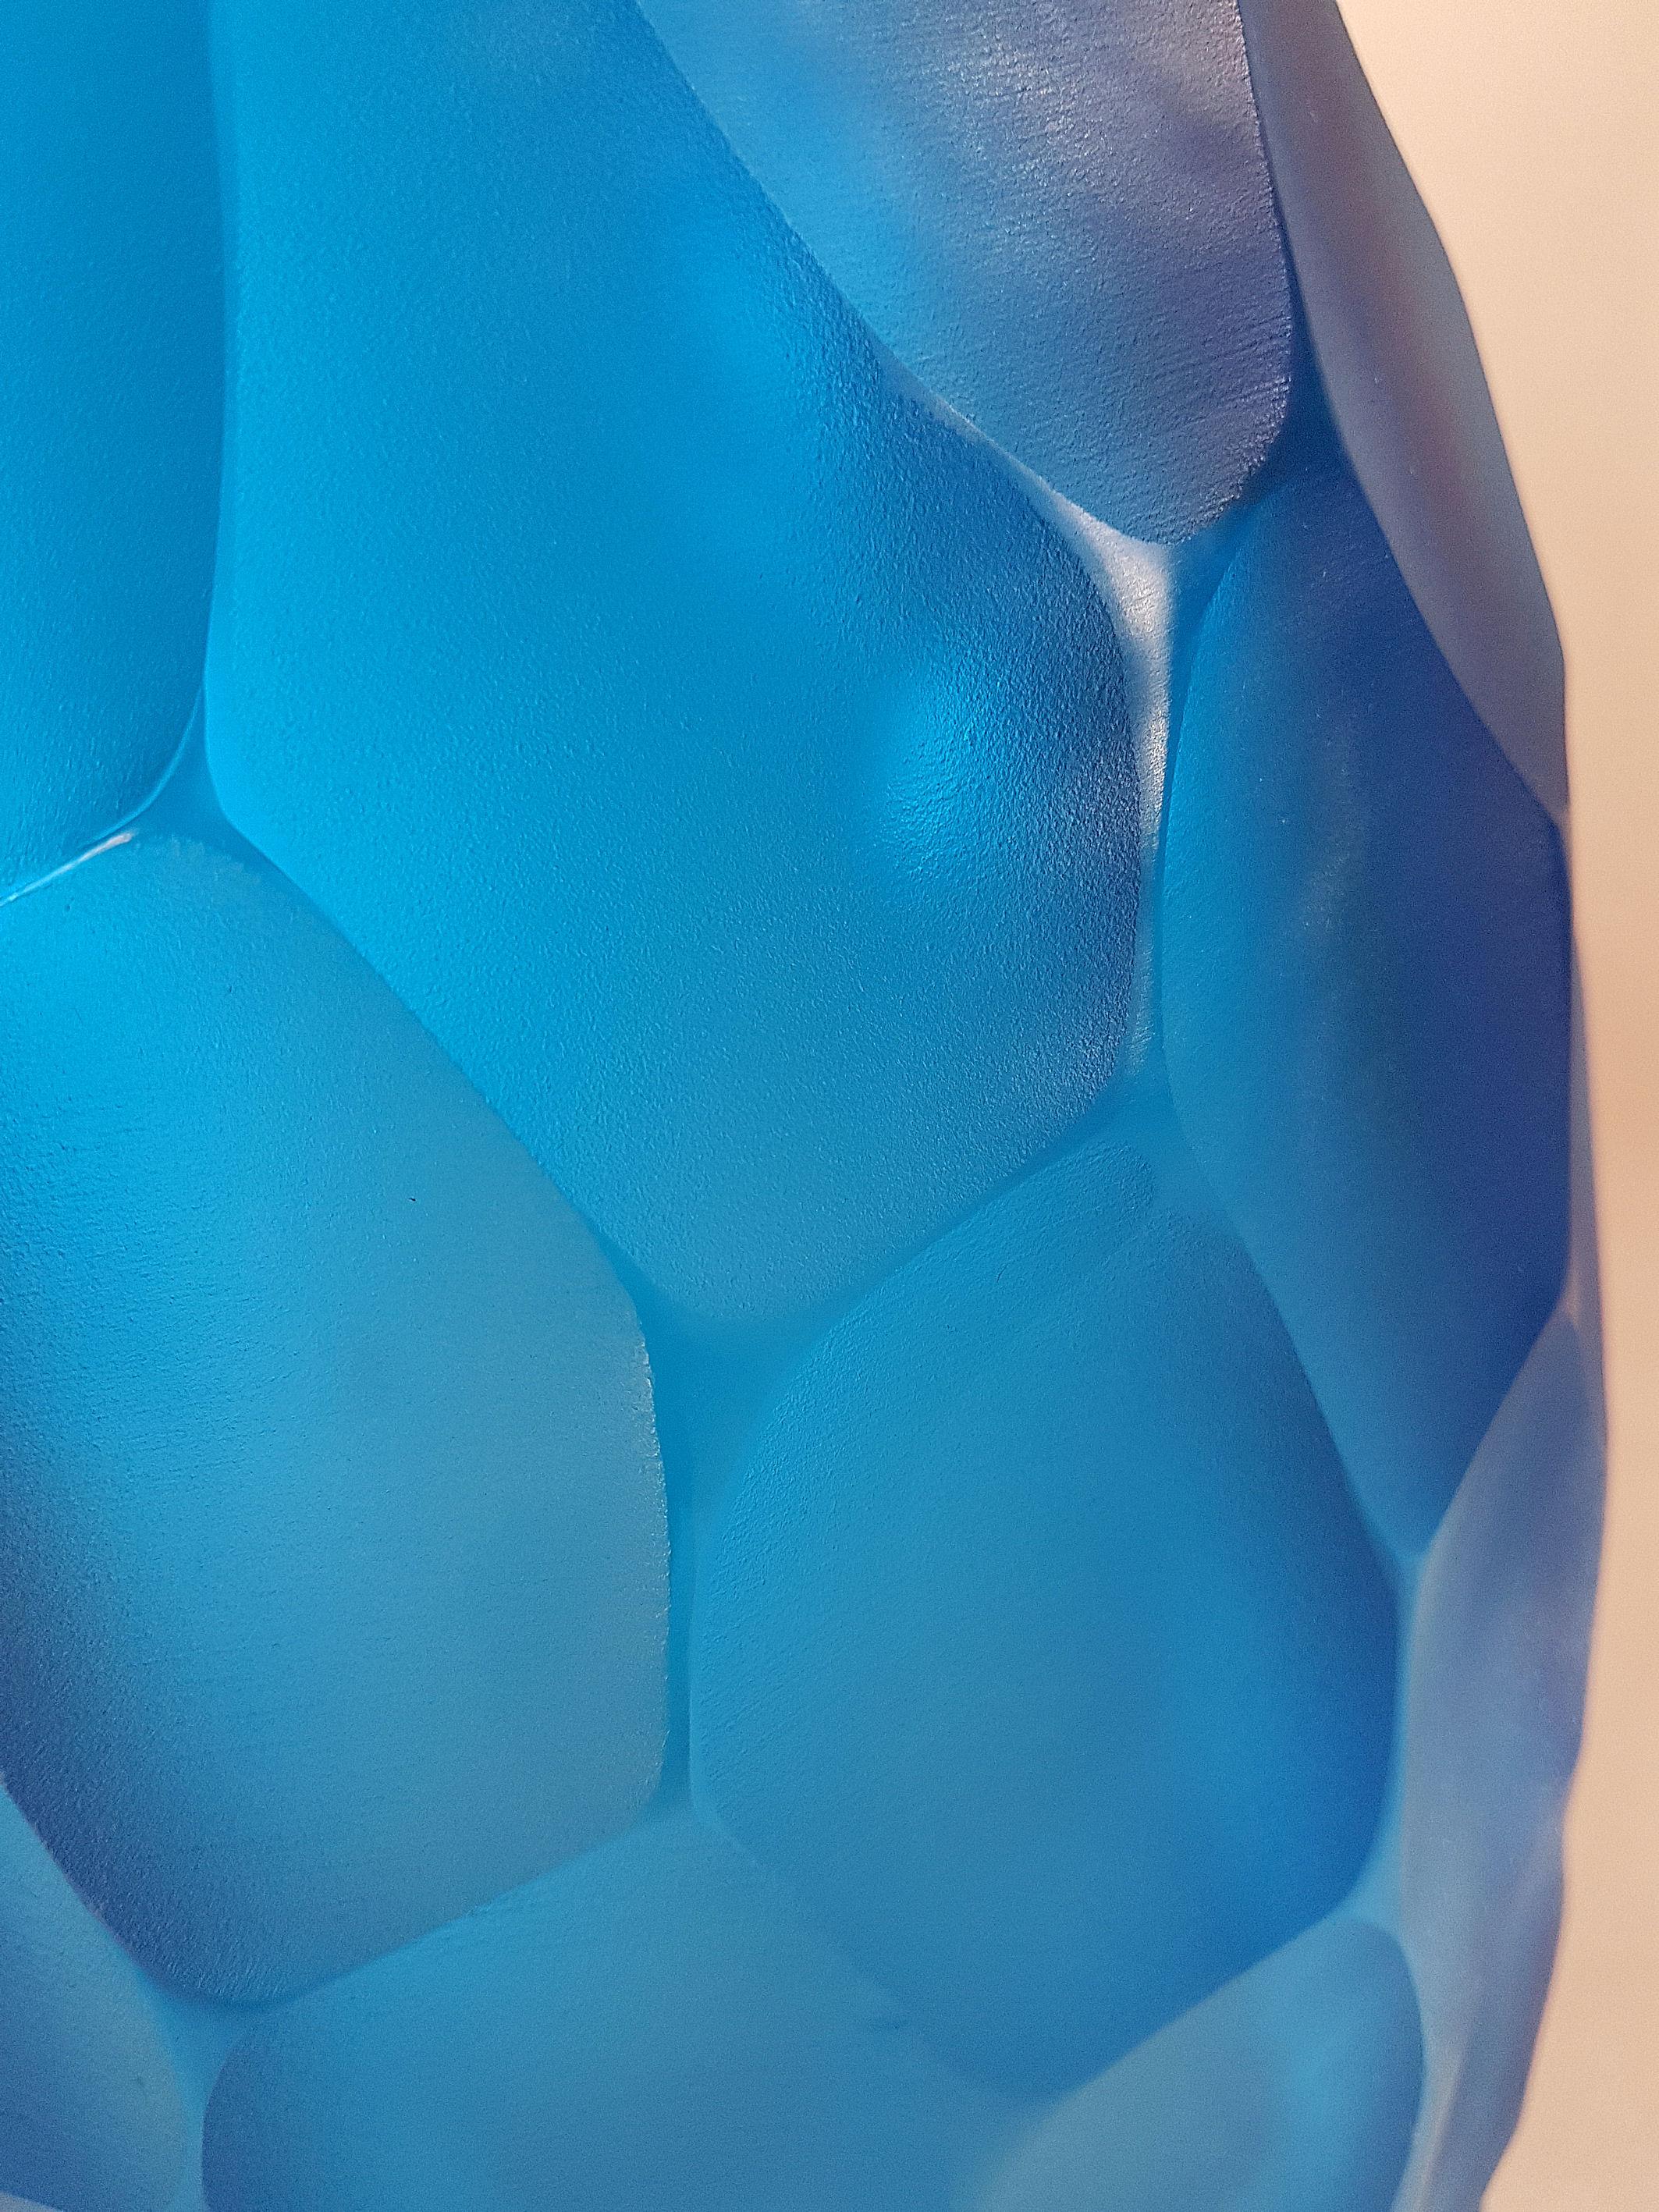 Large Mid-Century Modern Blue Faceted Murano Glass Vase by Simone Cenedese Italy In Excellent Condition In Dallas, TX